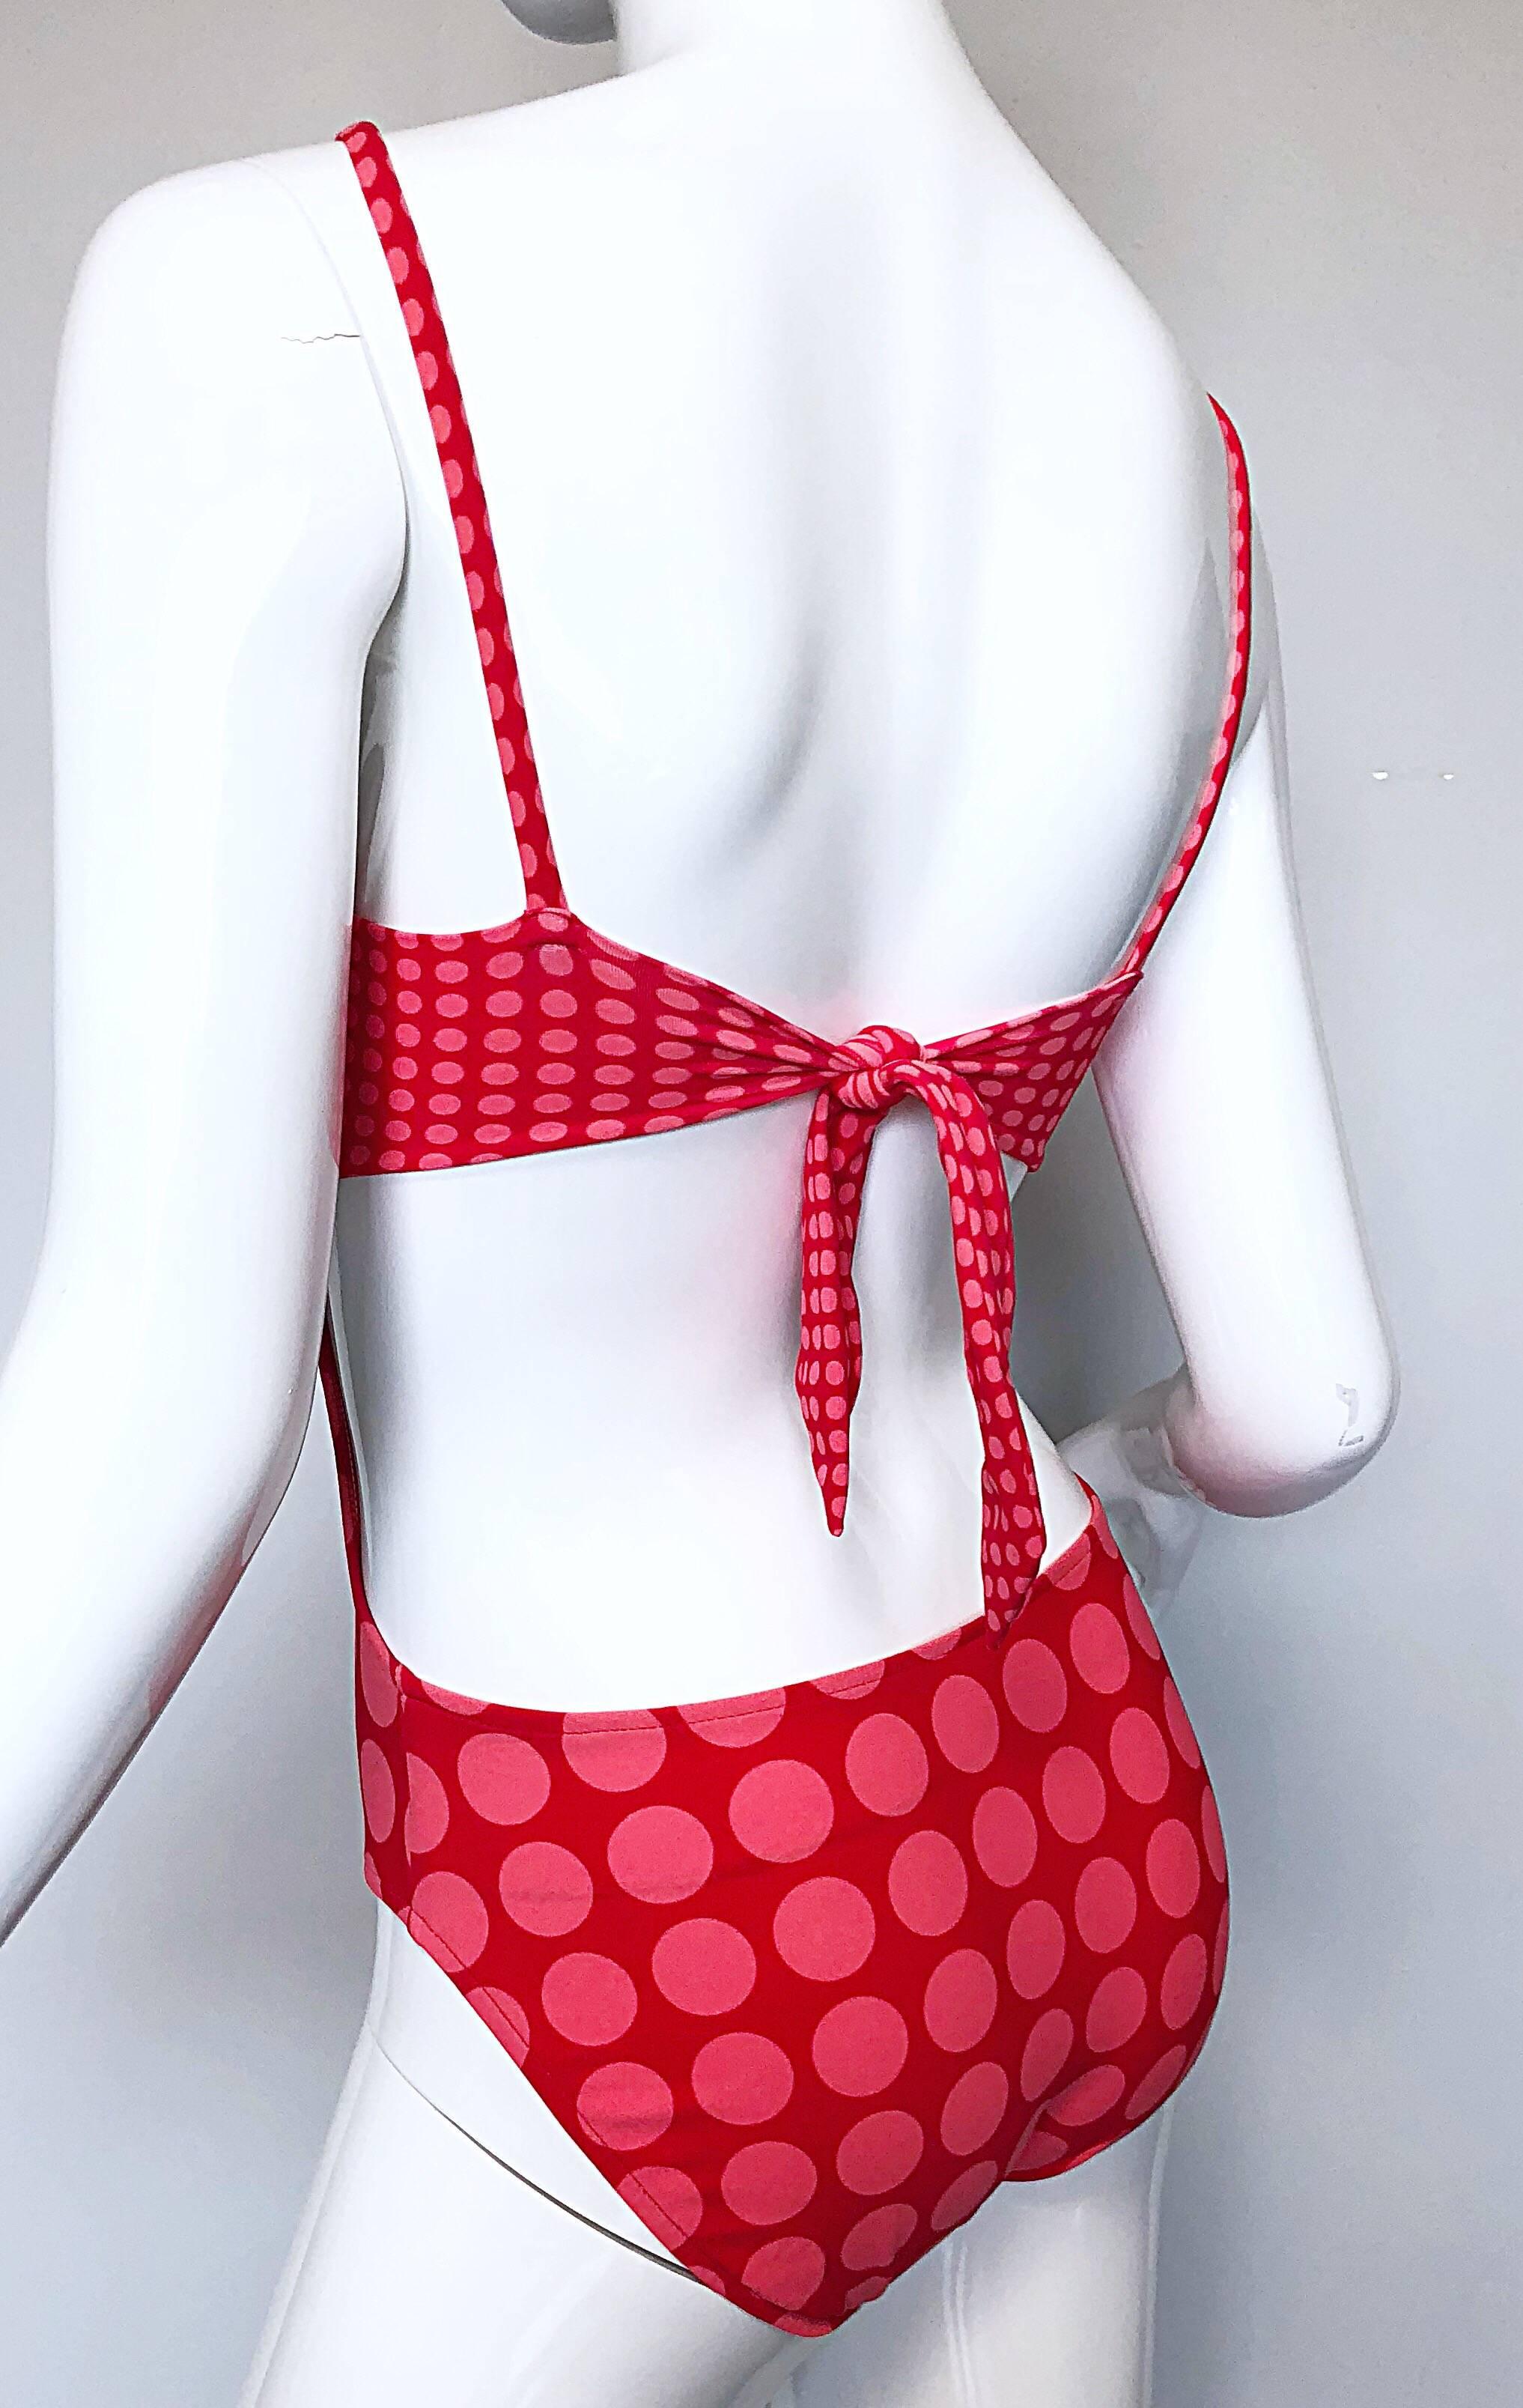 Women's Bill Blass Vintage Cut Out 1990s Pink Red Polka Dot One Piece Bodysuit Swimsuit  For Sale